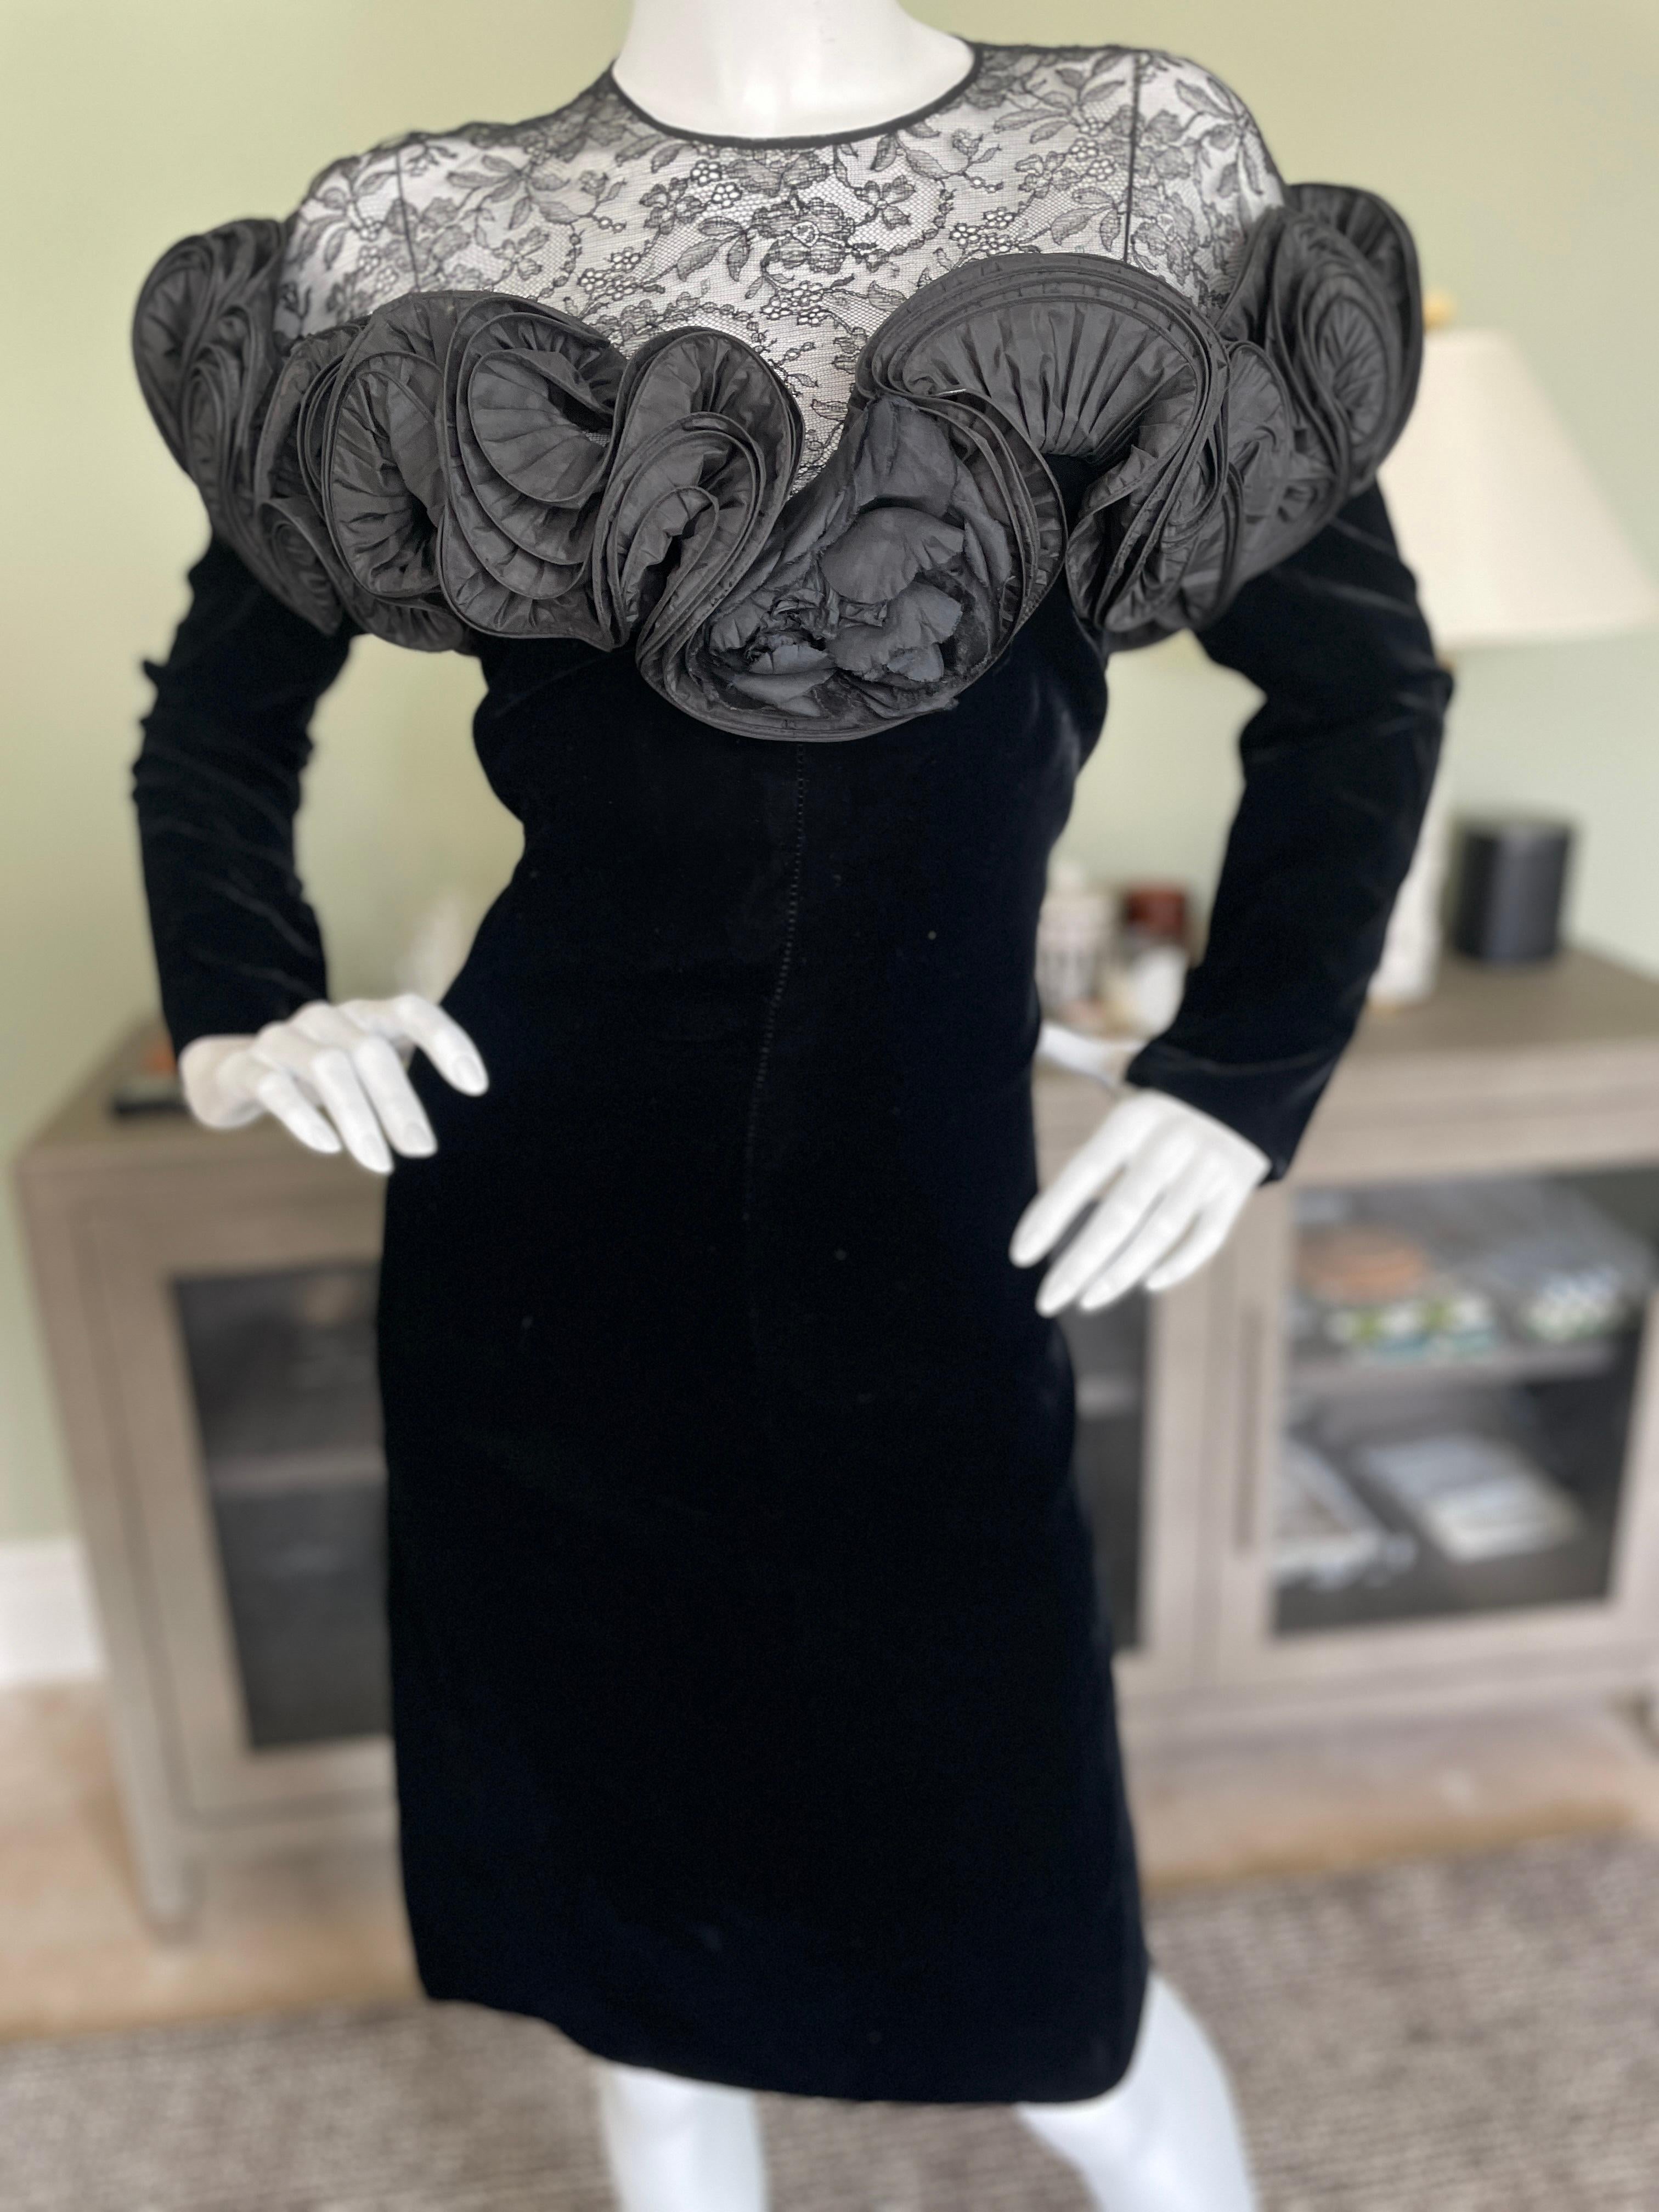 Nina Ricci 1980's Demi Couture Black Velvet Ruffled Dress w Sheer Lace Shoulders.
From Nan Duskin, one of Philadelphia's chicest stores in the eighties.
This is so beautiful, just stunning.
Size 42
 Bust 36